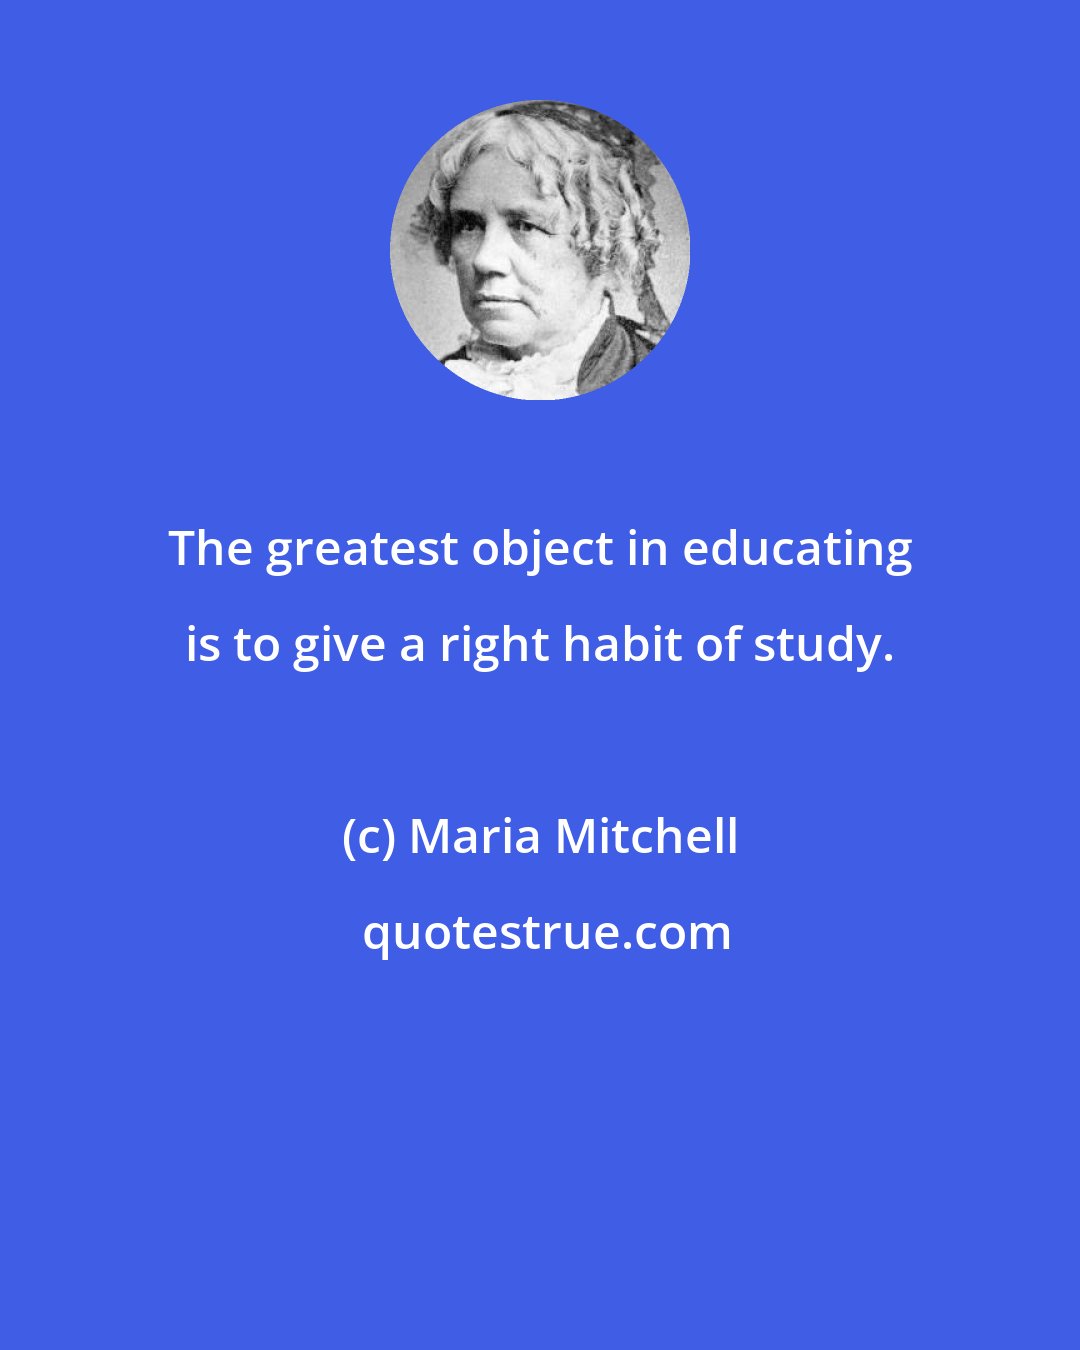 Maria Mitchell: The greatest object in educating is to give a right habit of study.